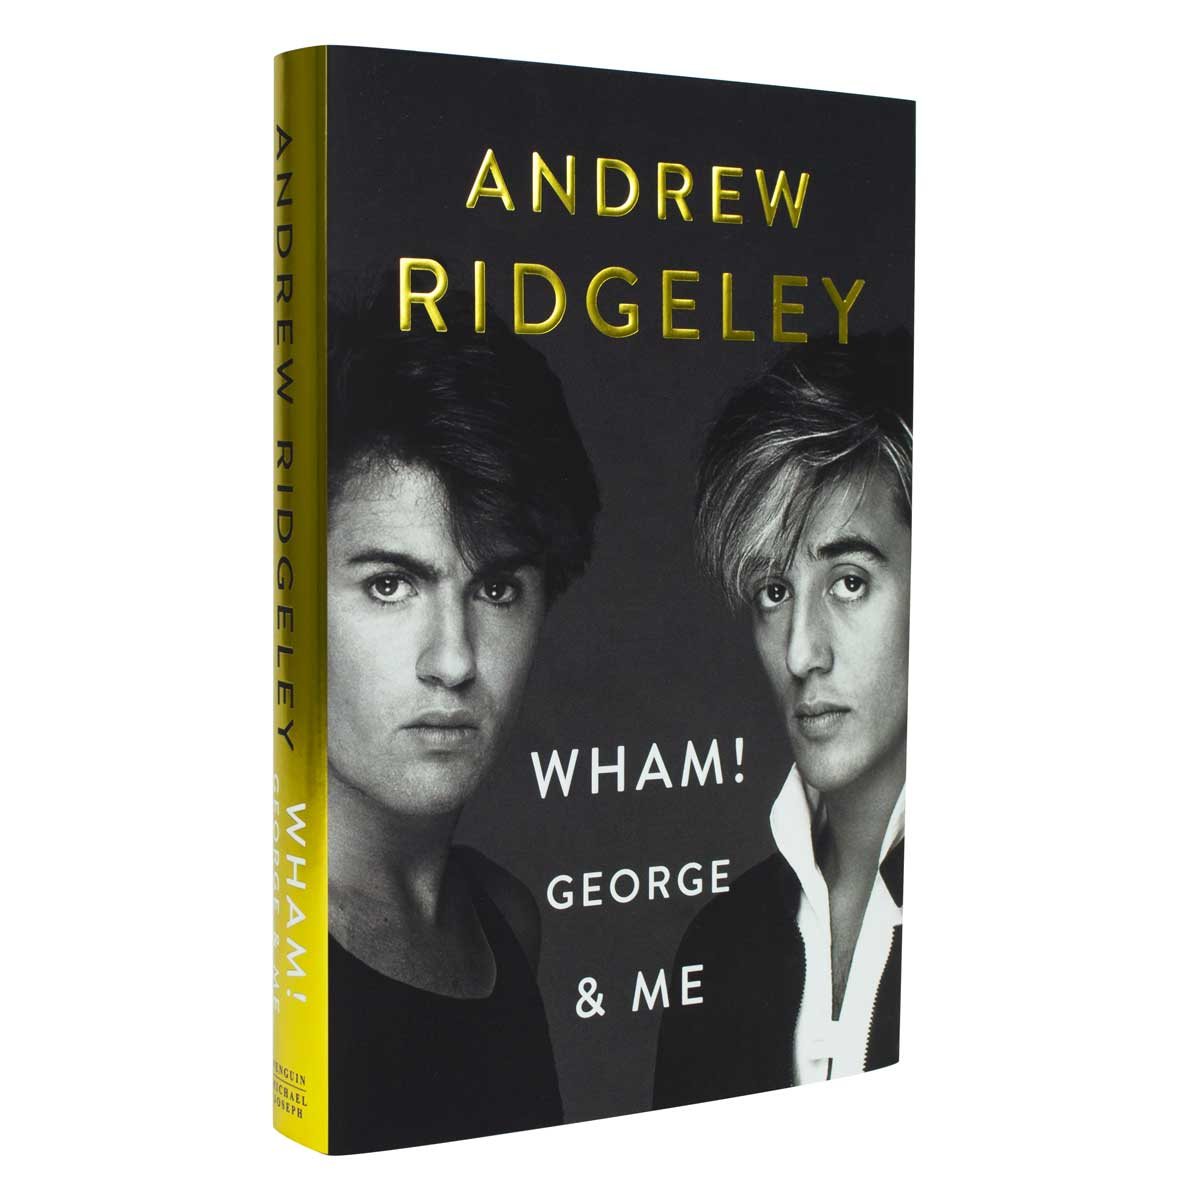 74 List Andrew Ridgeley Book Review for business